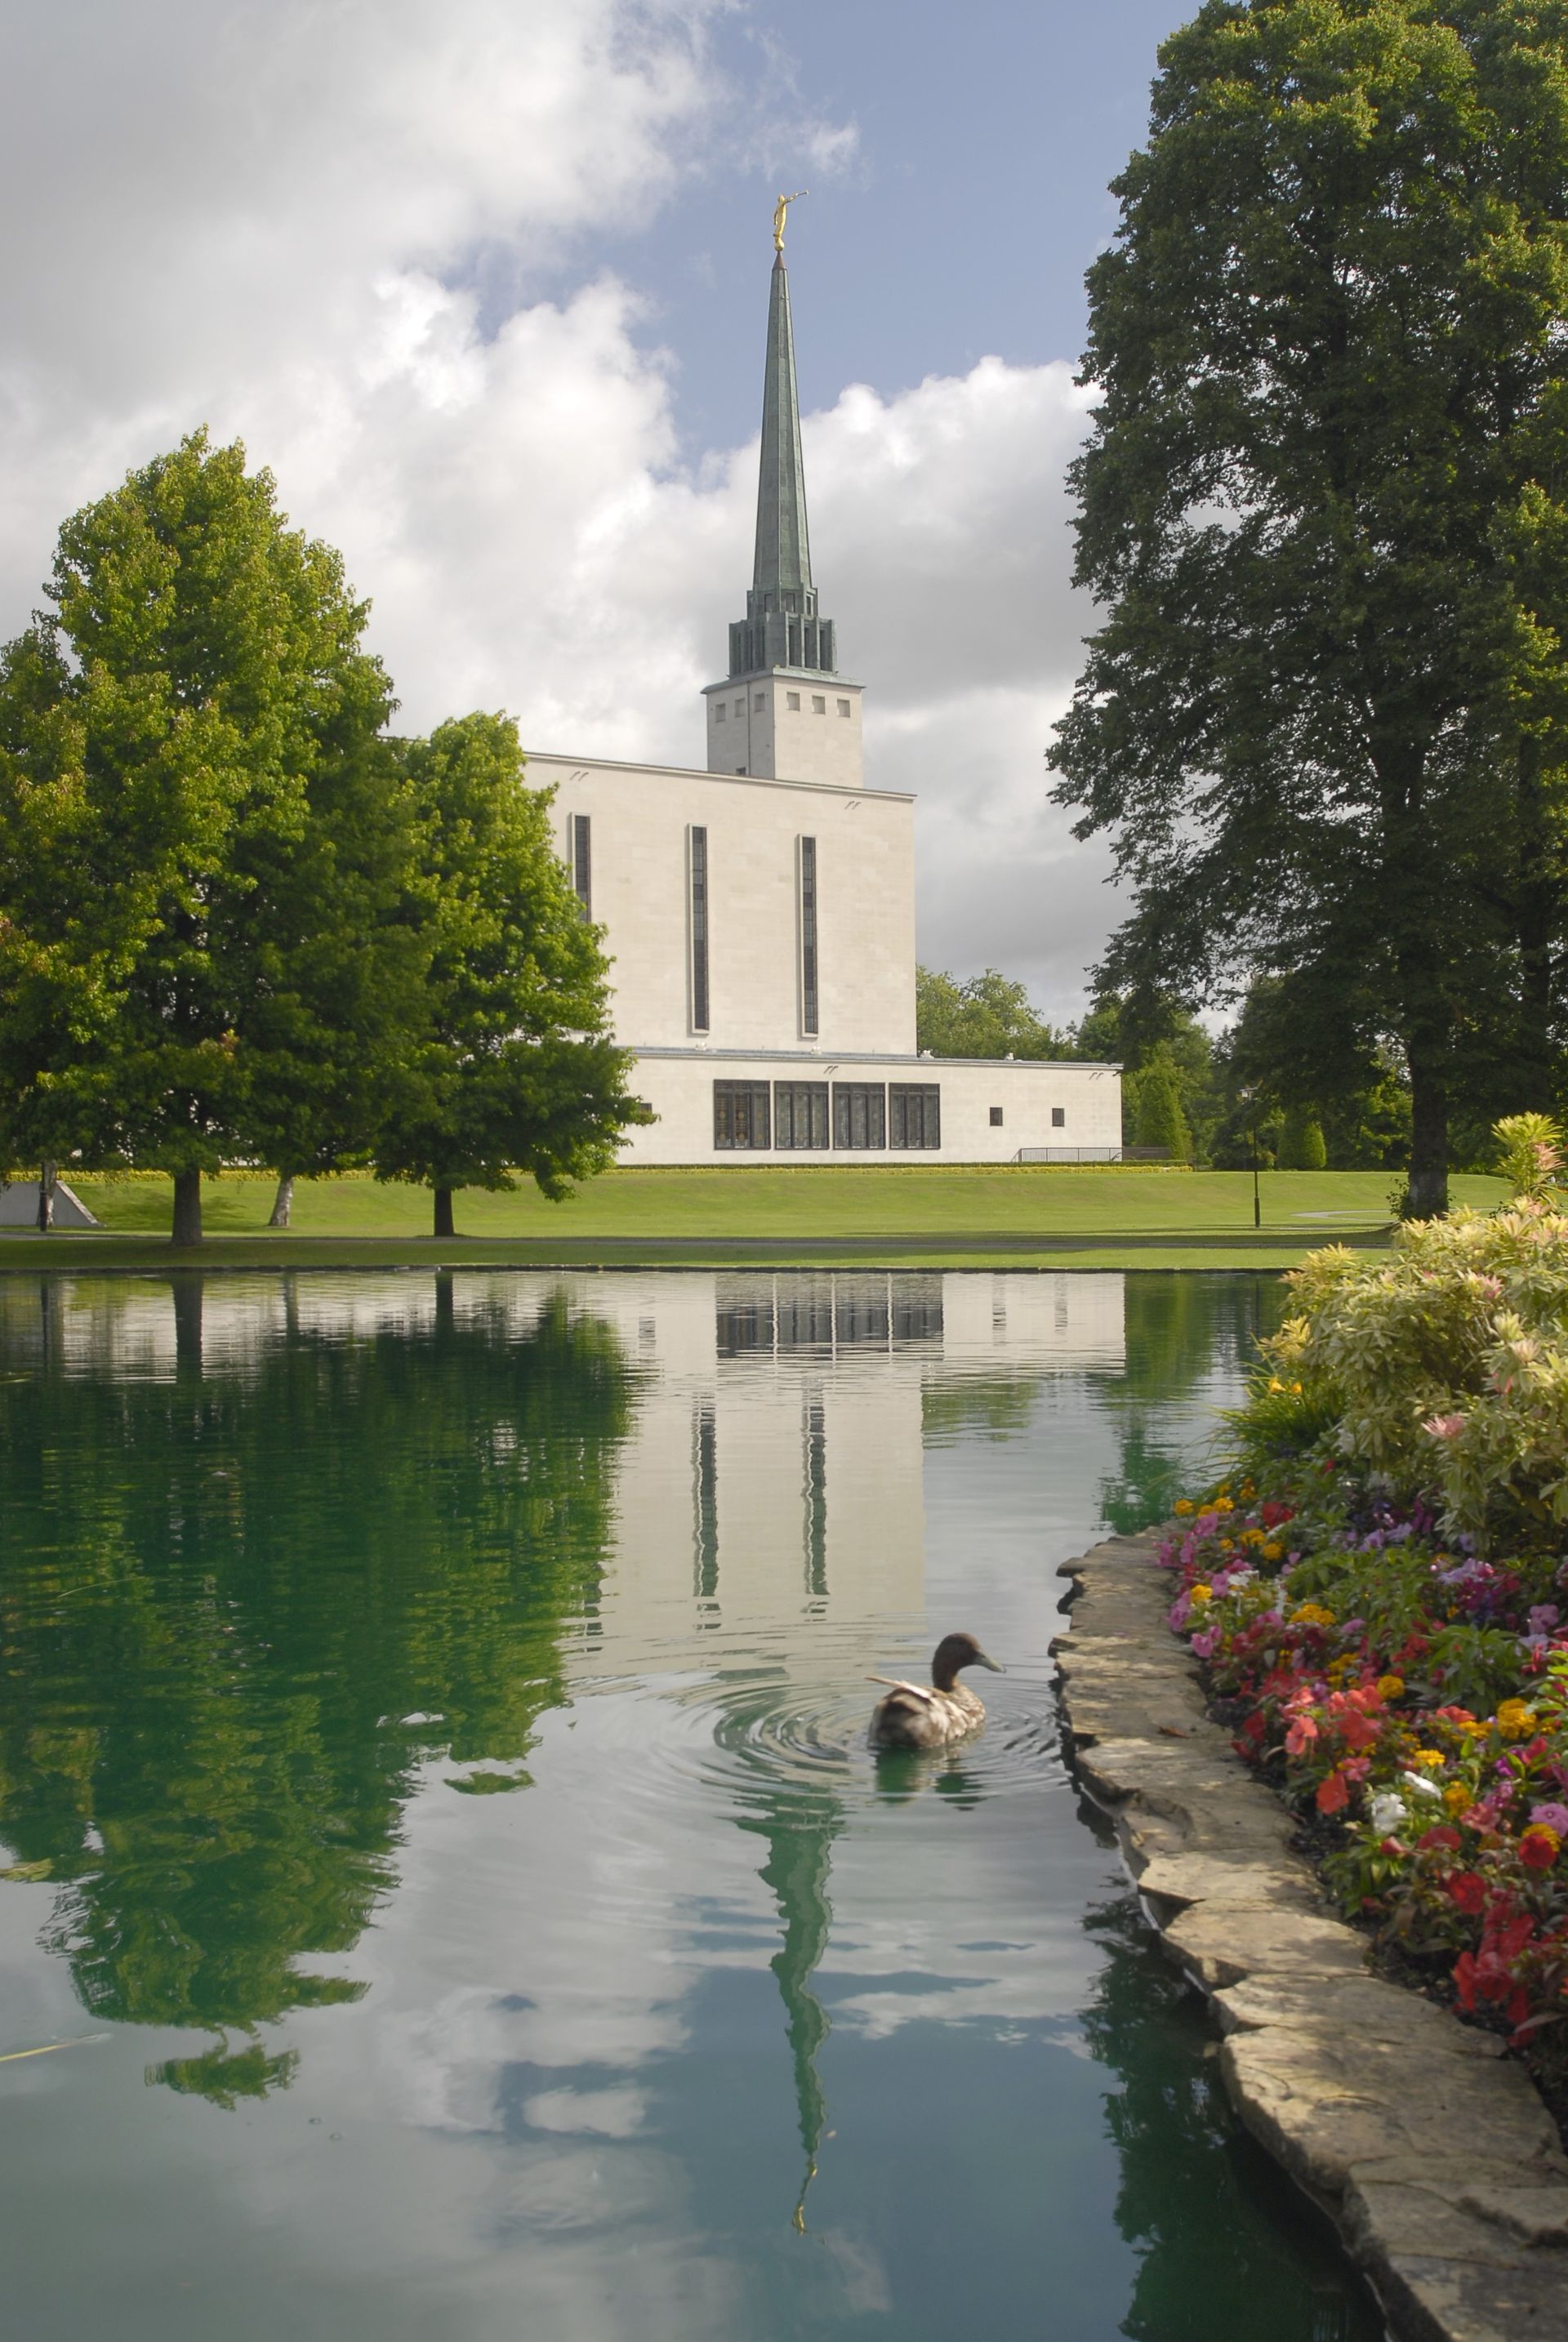 The London England Temple exterior, including the pond and scenery.